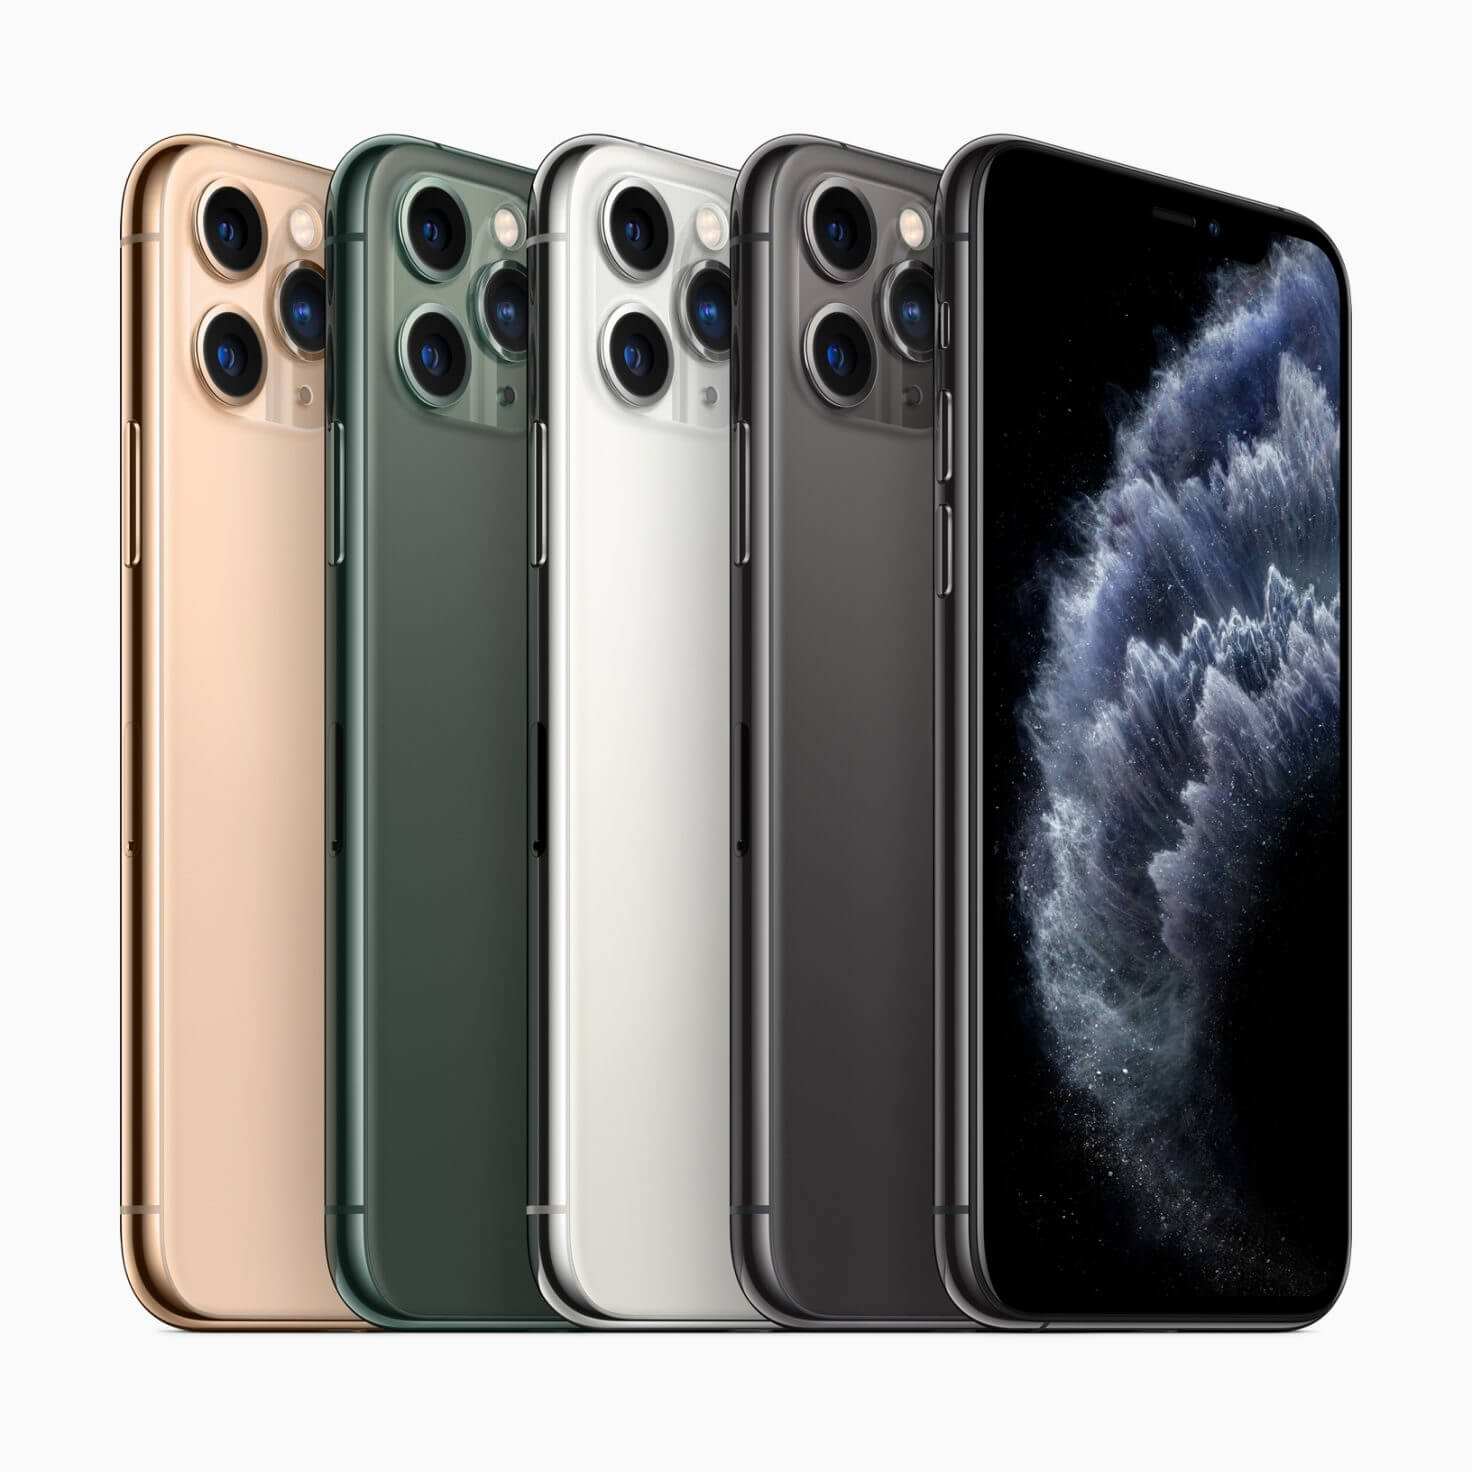 iPhone-11-Pro-all-models-1472×1472